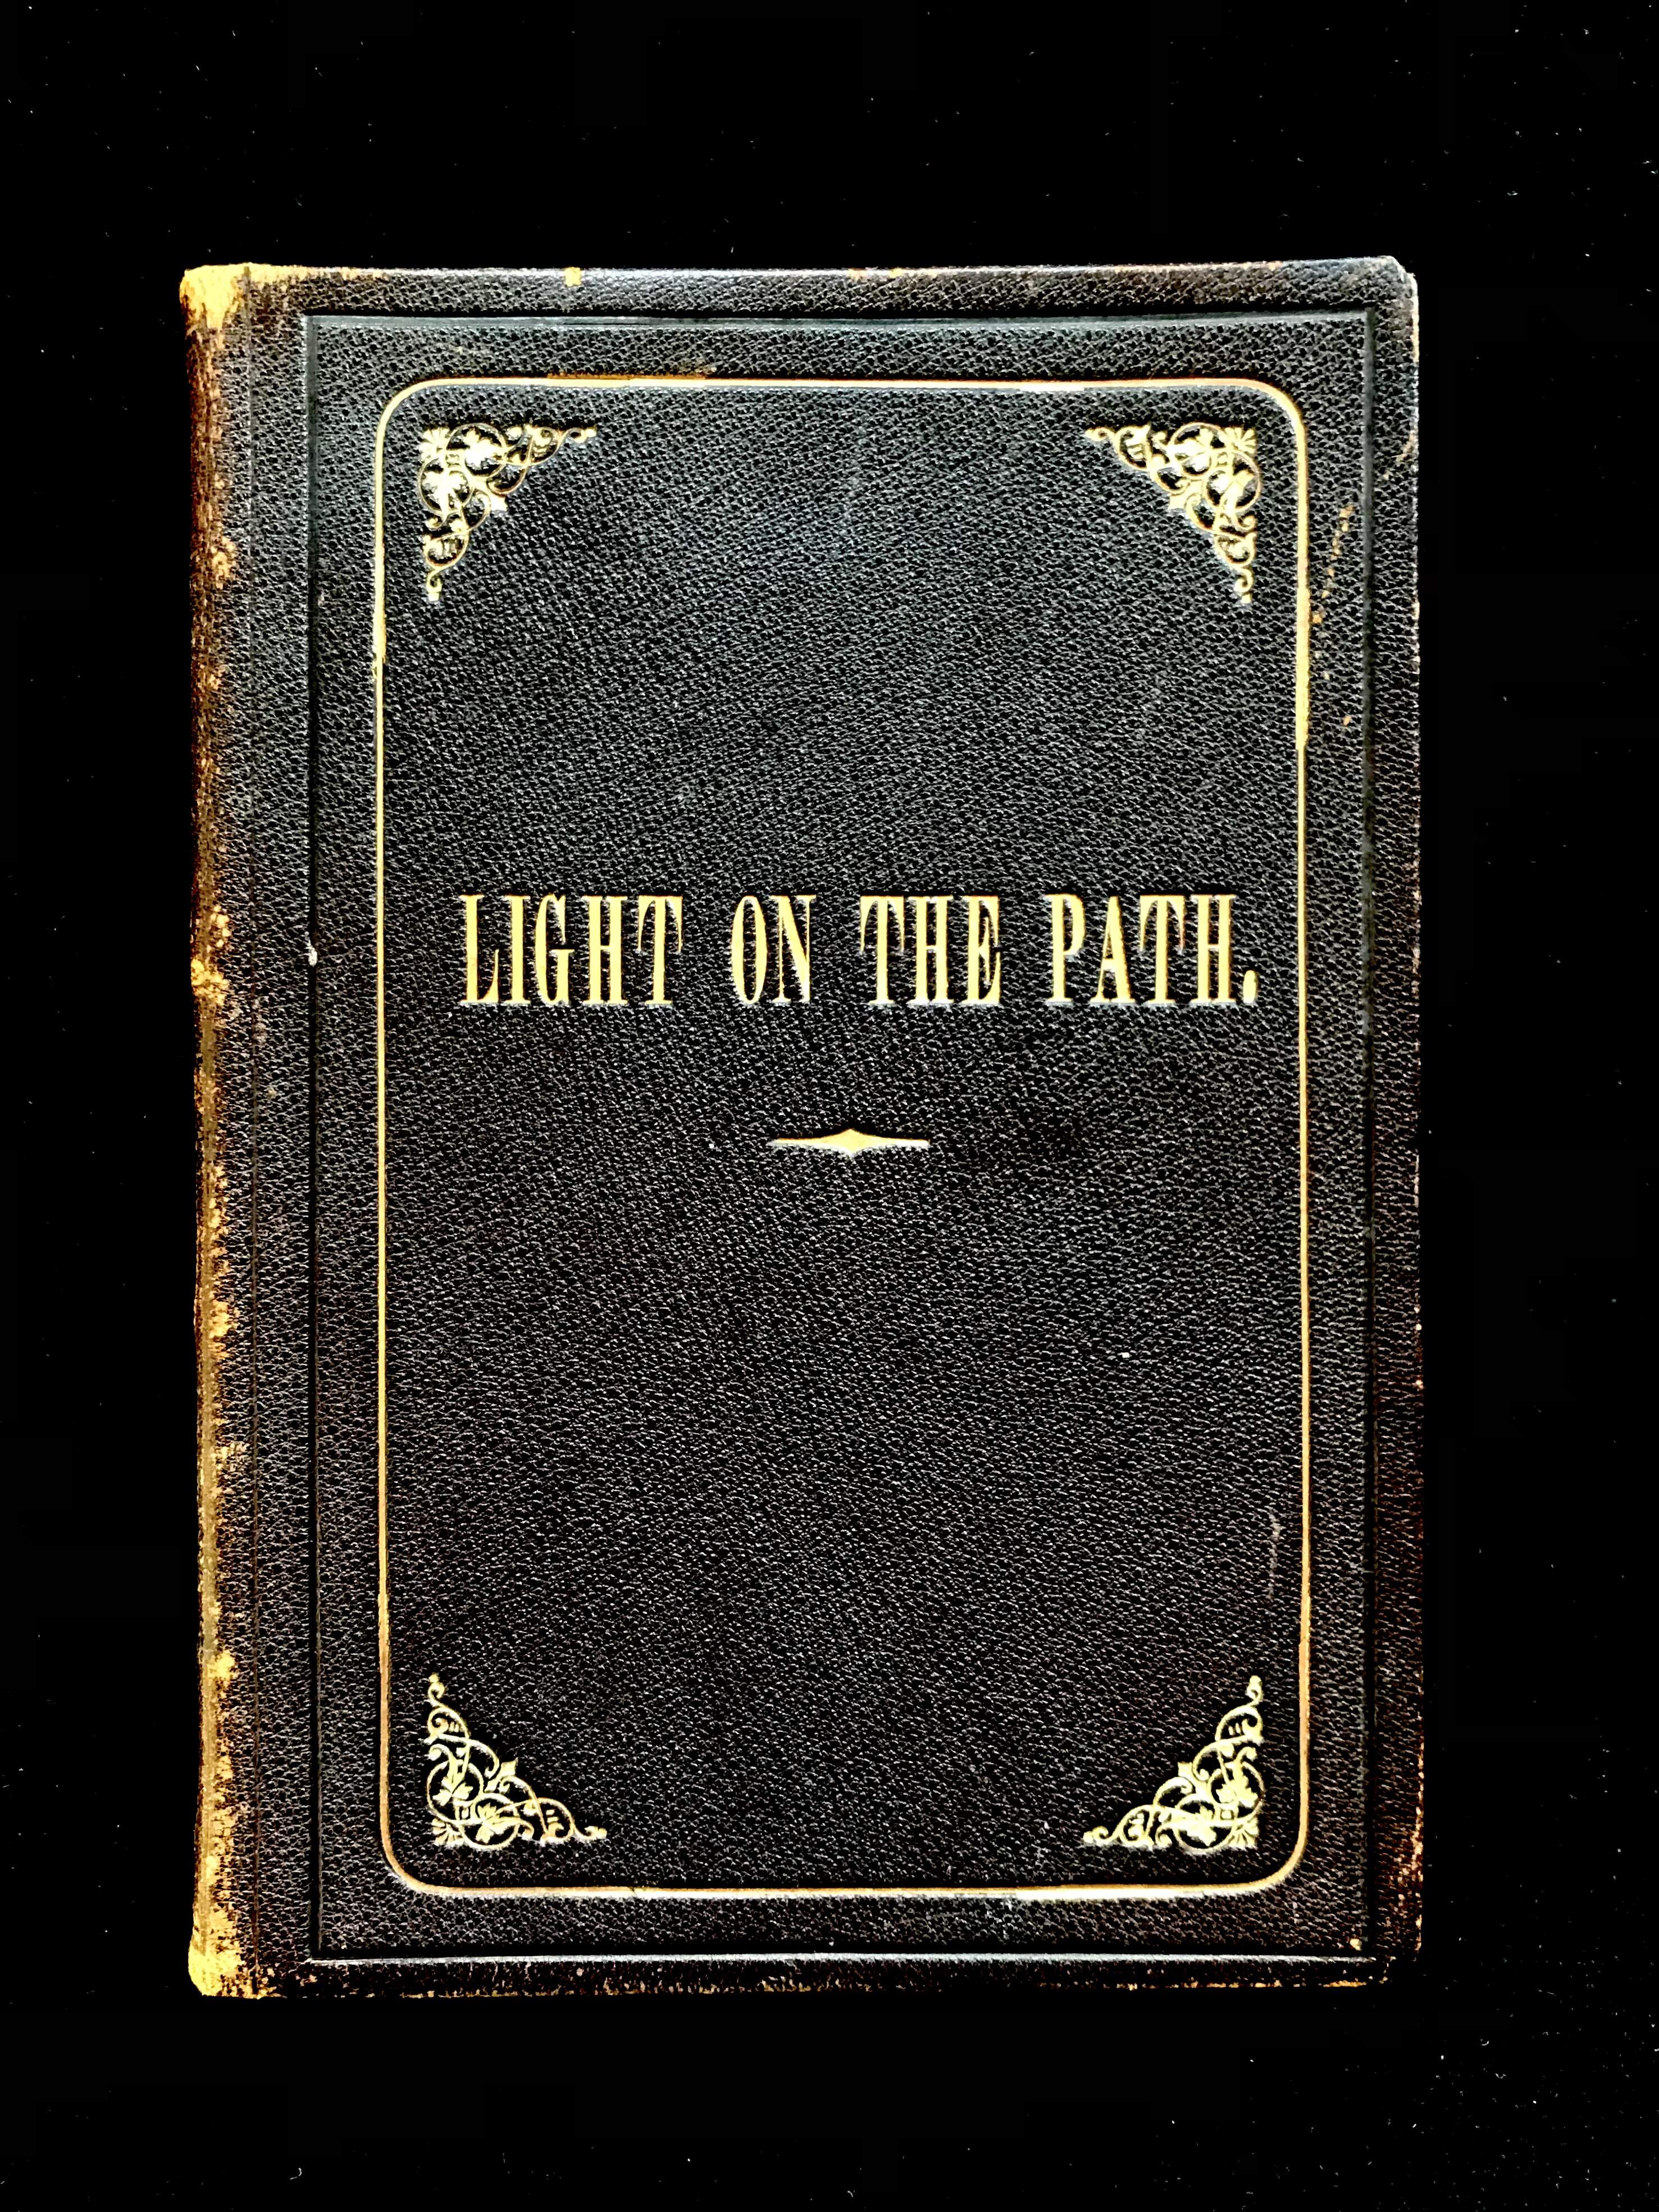 Light On The Path by M. C.